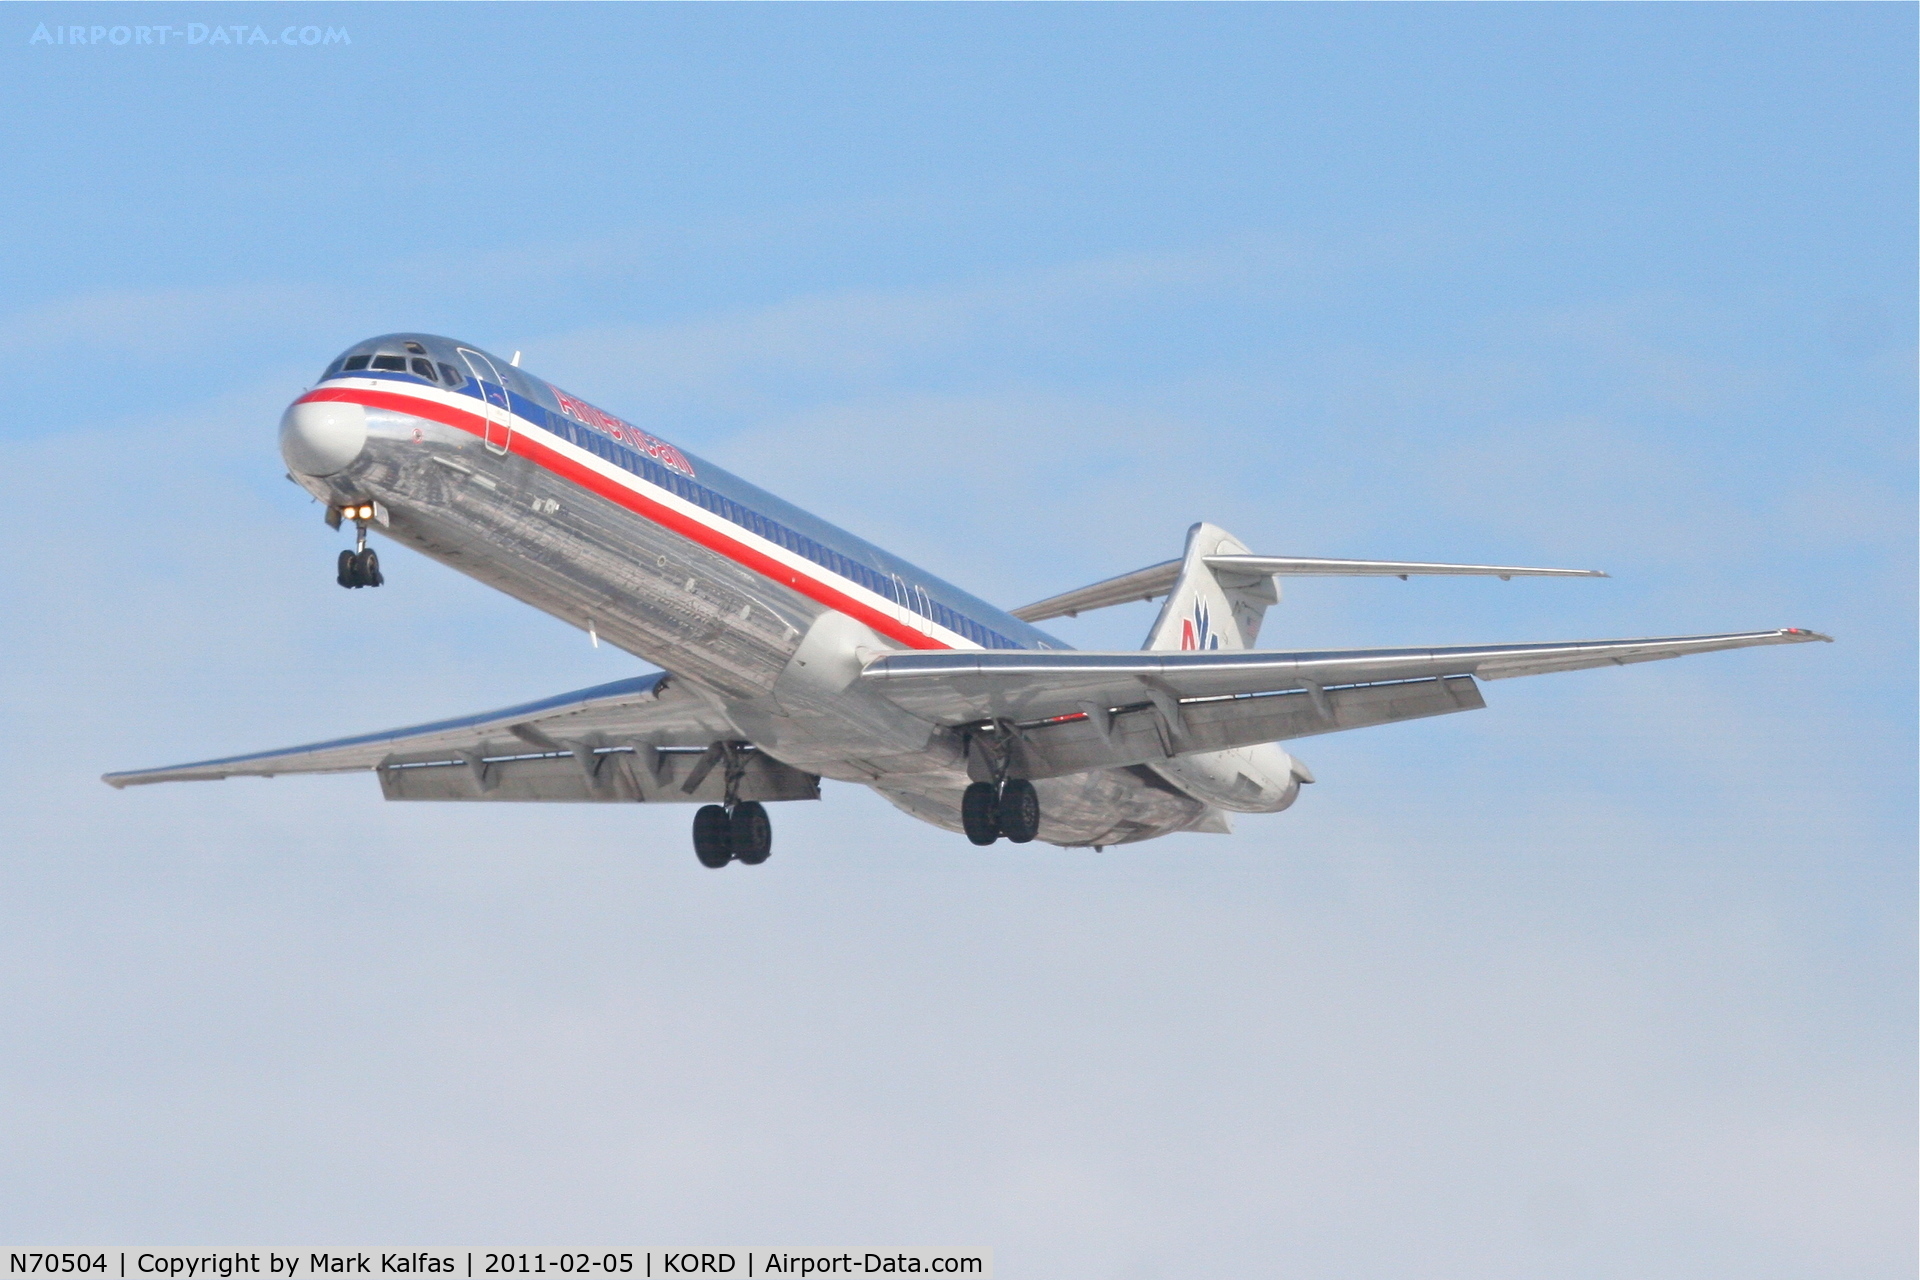 N70504, 1989 McDonnell Douglas MD-82 (DC-9-82) C/N 49798, American Airlines Mcdonnell Douglas DC-9-82, AAL2423 on approach RWY 28 KORD, arriving from KPBI.